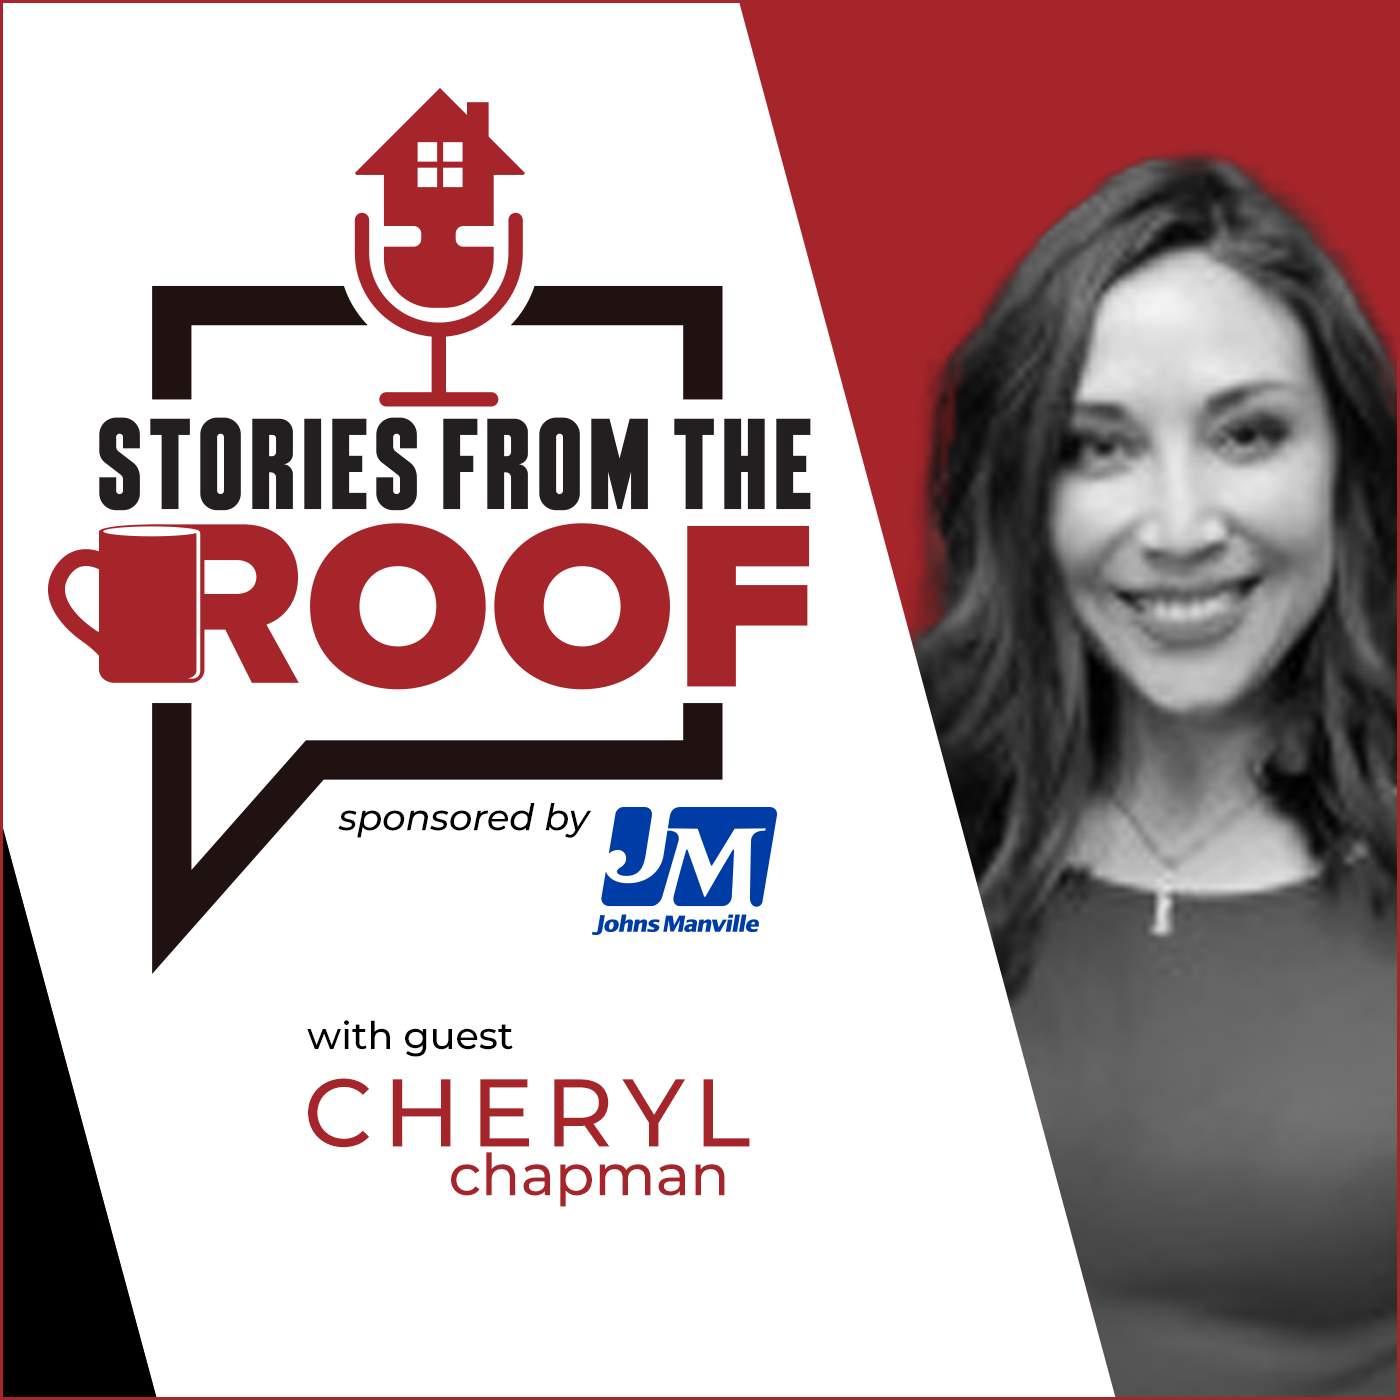 Cheryl Chapman - Stories From the Roof Sponsored by Johns Manville